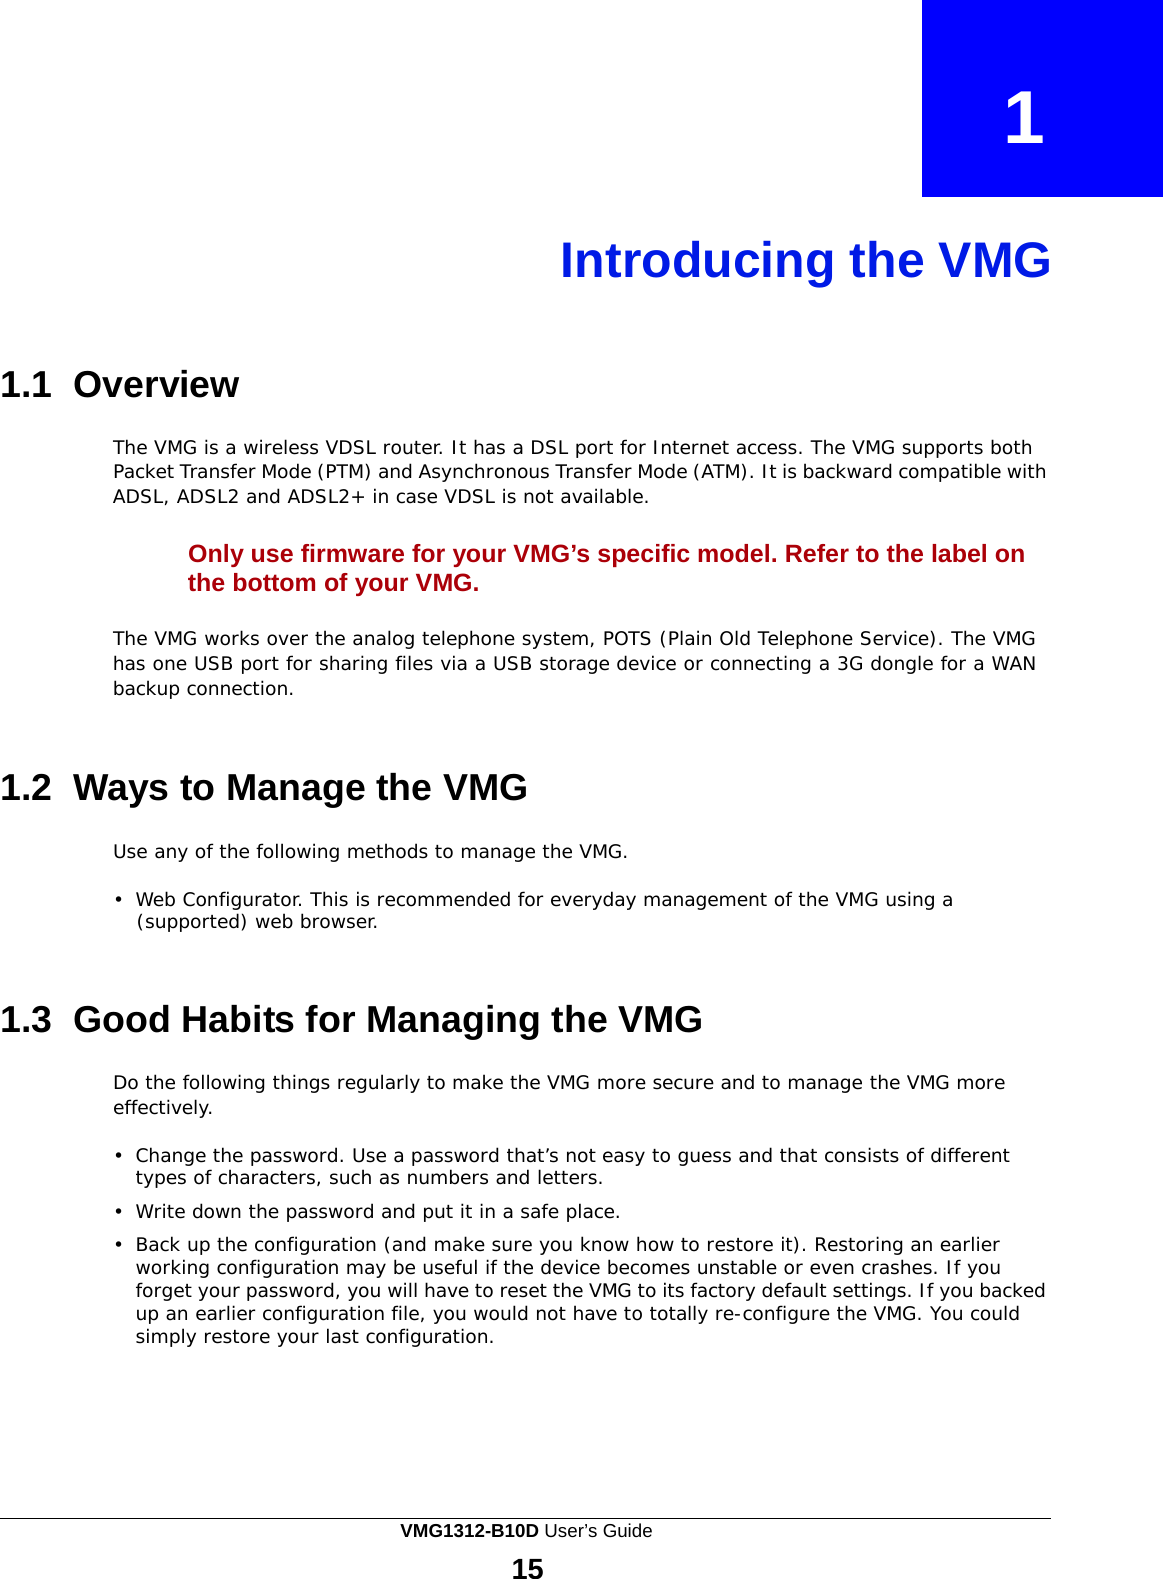  1    Introducing the VMG     1.1  Overview  The VMG is a wireless VDSL router. It has a DSL port for Internet access. The VMG supports both Packet Transfer Mode (PTM) and Asynchronous Transfer Mode (ATM). It is backward compatible with ADSL, ADSL2 and ADSL2+ in case VDSL is not available.  Only use firmware for your VMG’s specific model. Refer to the label on the bottom of your VMG.  The VMG works over the analog telephone system, POTS (Plain Old Telephone Service). The VMG has one USB port for sharing files via a USB storage device or connecting a 3G dongle for a WAN backup connection.    1.2  Ways to Manage the VMG  Use any of the following methods to manage the VMG.  •  Web Configurator. This is recommended for everyday management of the VMG using a (supported) web browser.    1.3 Good Habits for Managing the VMG  Do the following things regularly to make the VMG more secure and to manage the VMG more effectively.  •  Change the password. Use a password that’s not easy to guess and that consists of different types of characters, such as numbers and letters.  •  Write down the password and put it in a safe place.  •  Back up the configuration (and make sure you know how to restore it). Restoring an earlier working configuration may be useful if the device becomes unstable or even crashes. If you forget your password, you will have to reset the VMG to its factory default settings. If you backed up an earlier configuration file, you would not have to totally re-configure the VMG. You could simply restore your last configuration. VMG1312-B10D User’s Guide 15  